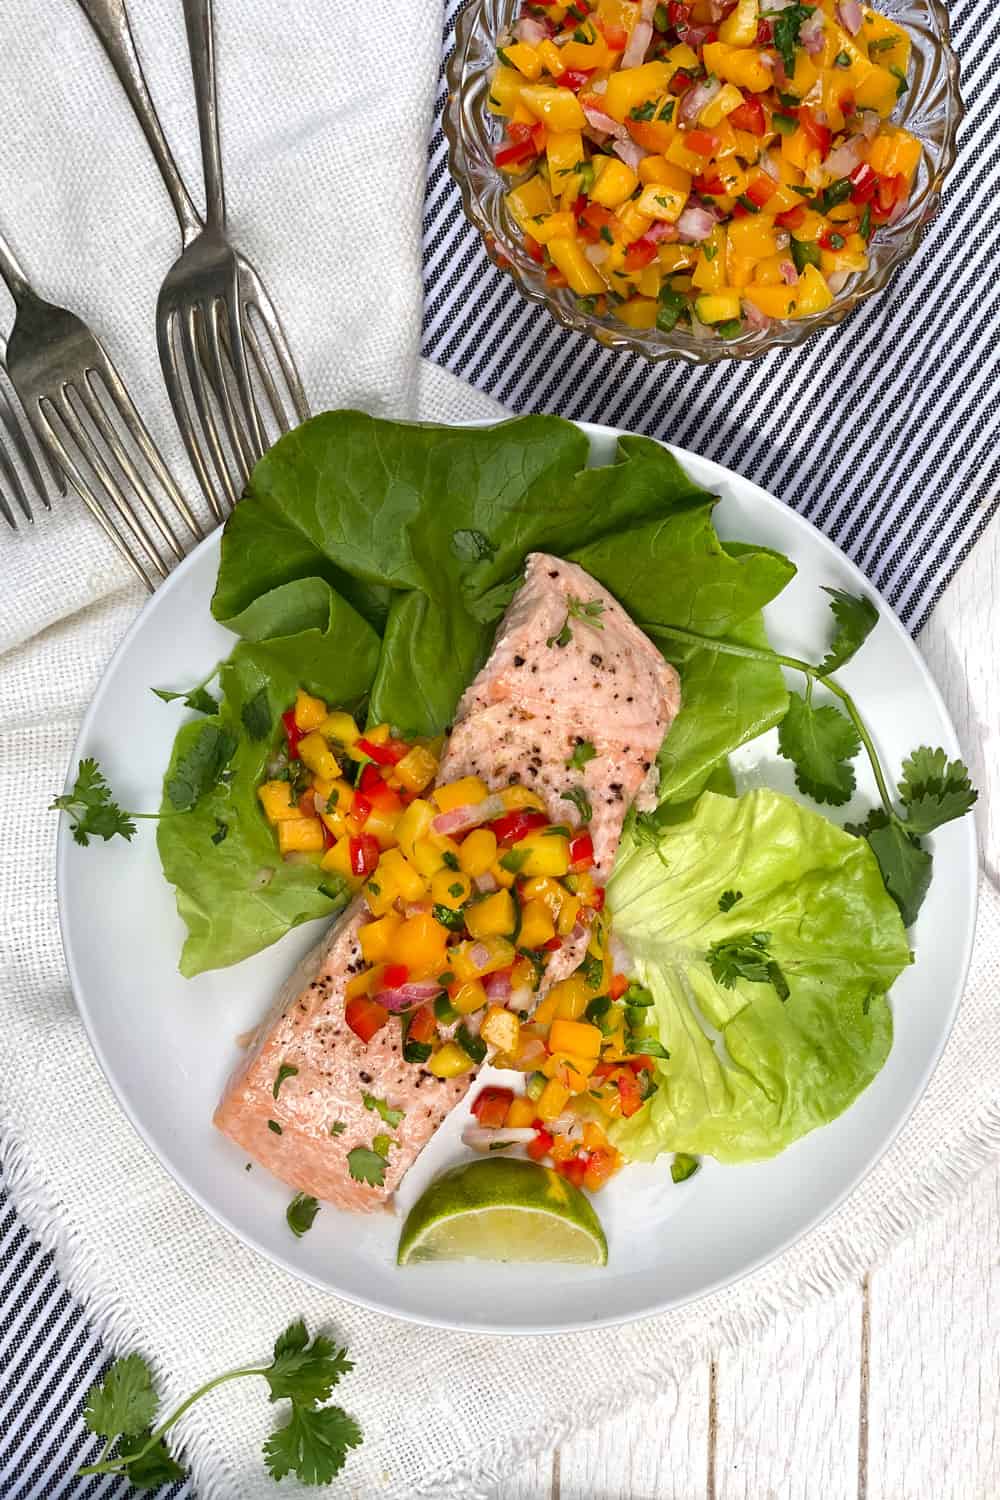 Broiled salmon on butter lettuce topped with mango salsa, several forks on the side and a small bowl of salsa on the side